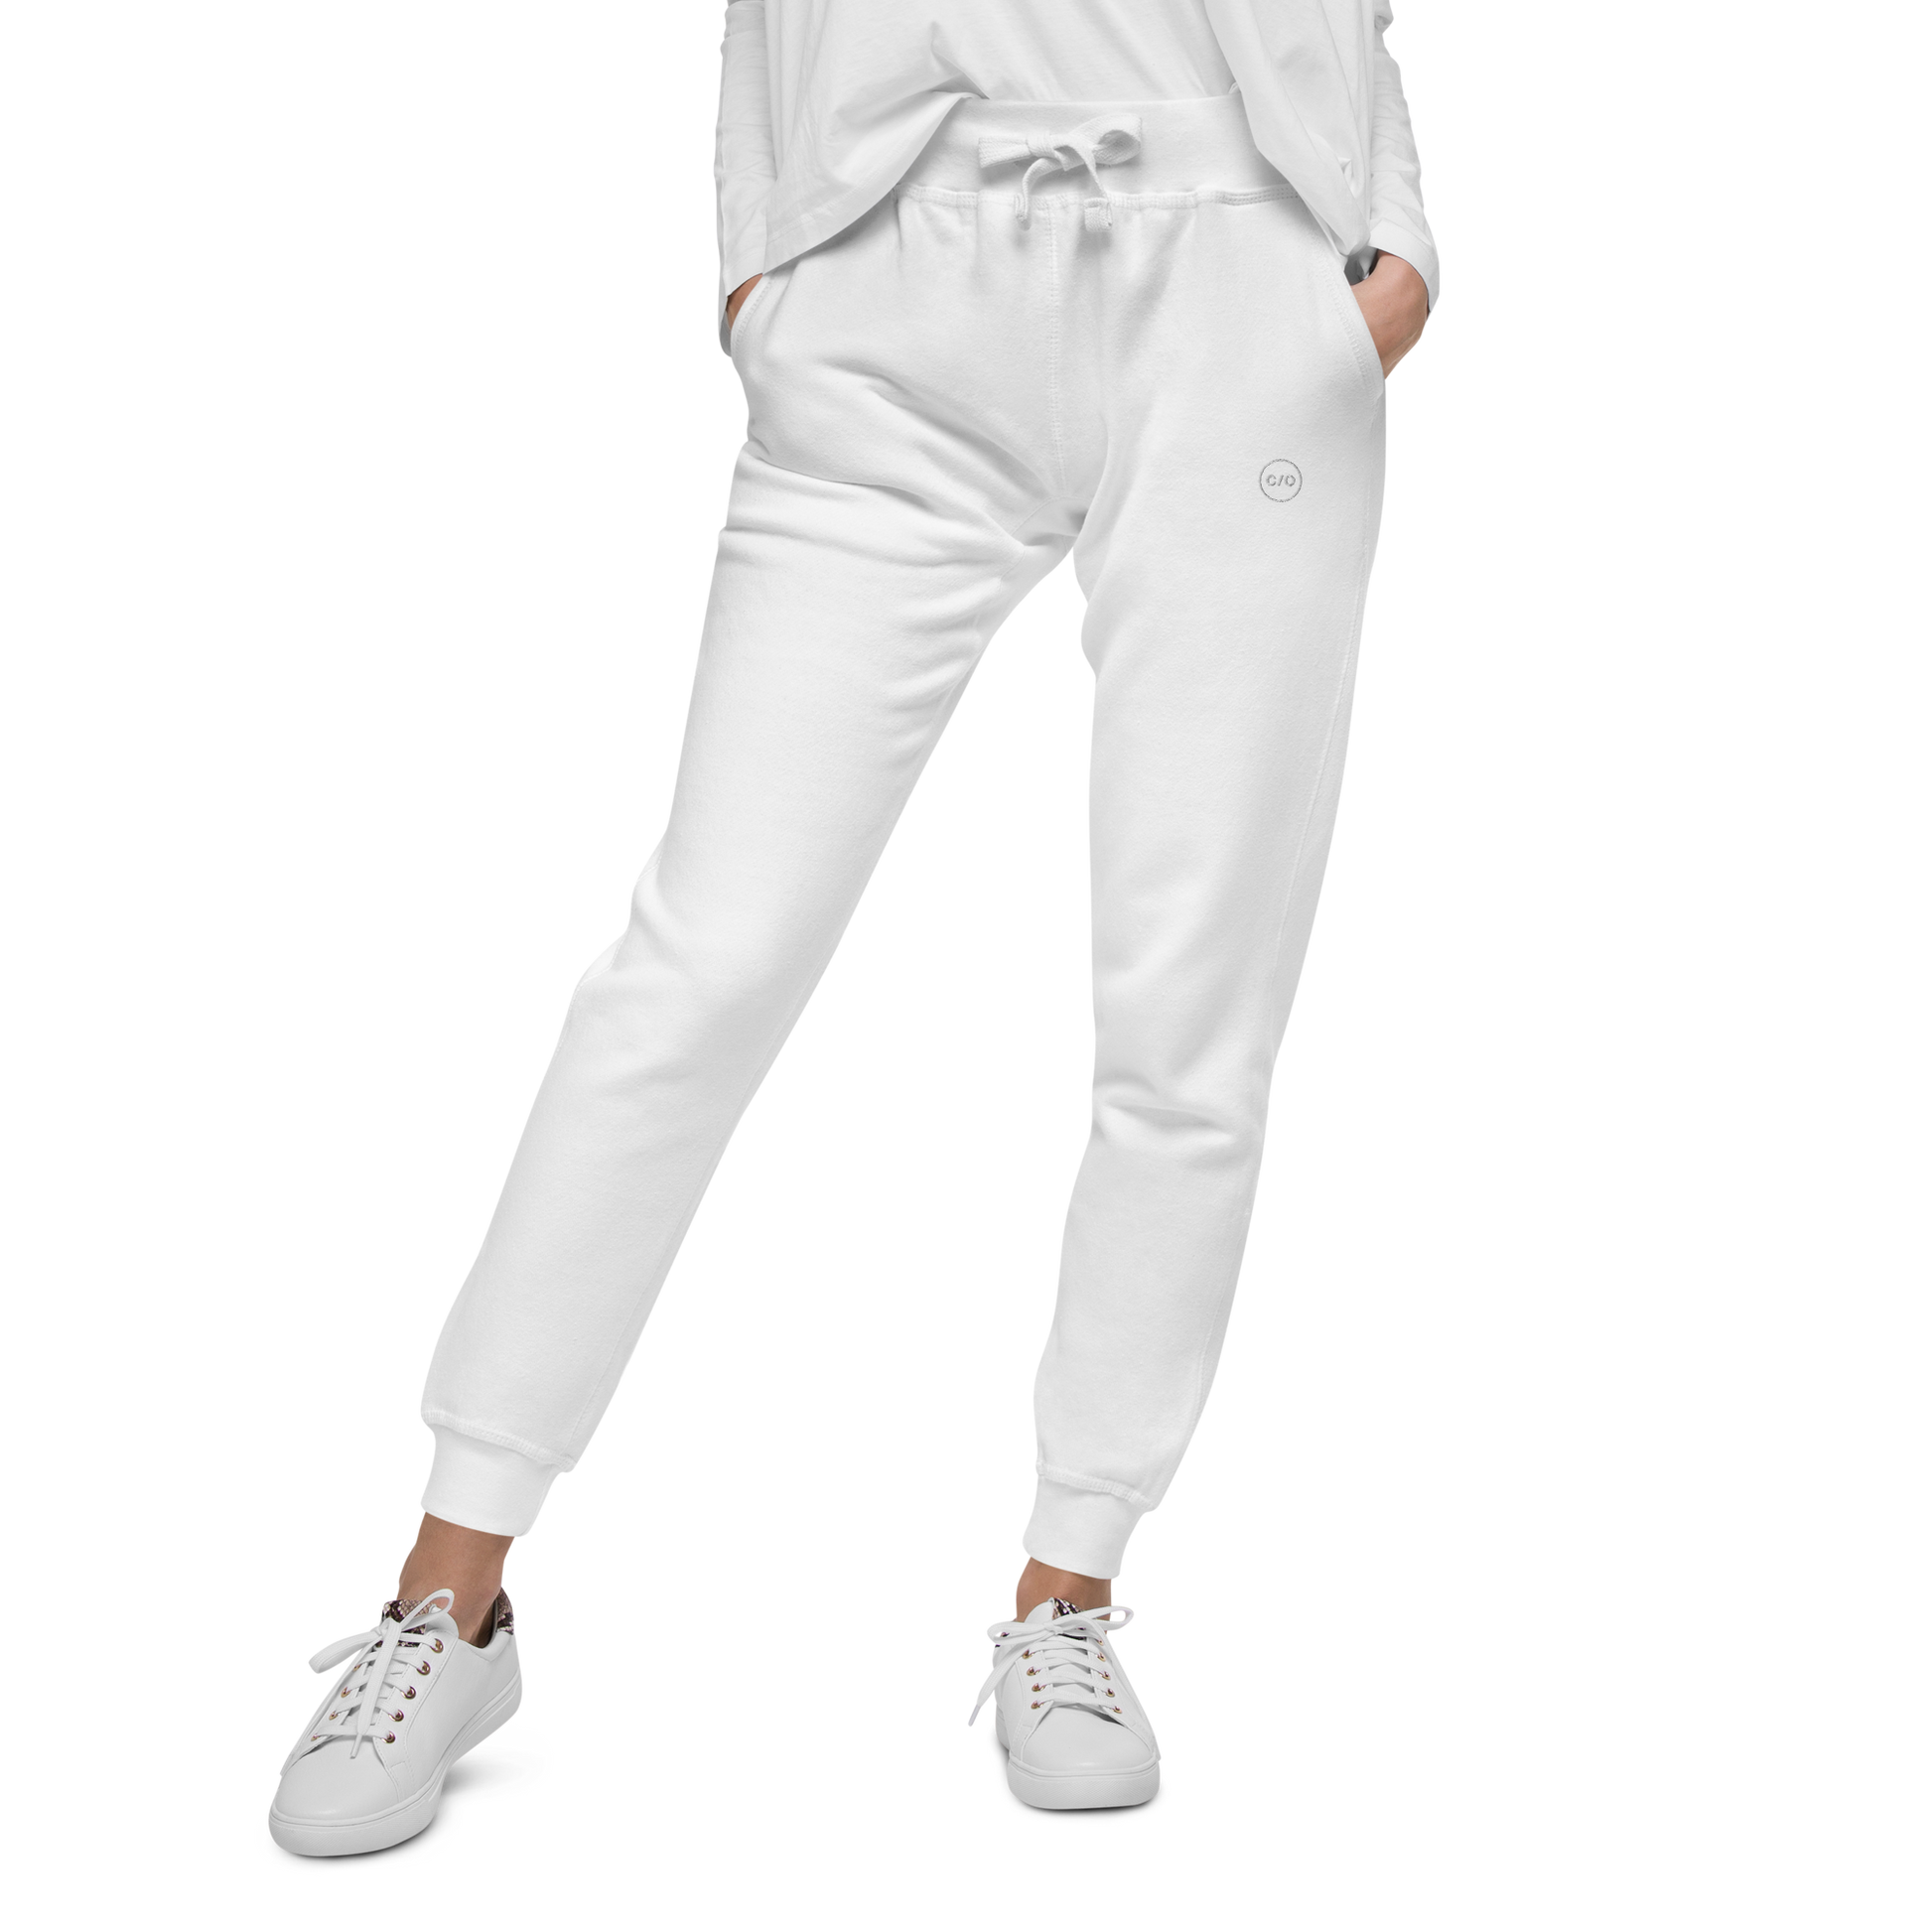 Neue Supply Co. Women's Performance Jogger in White